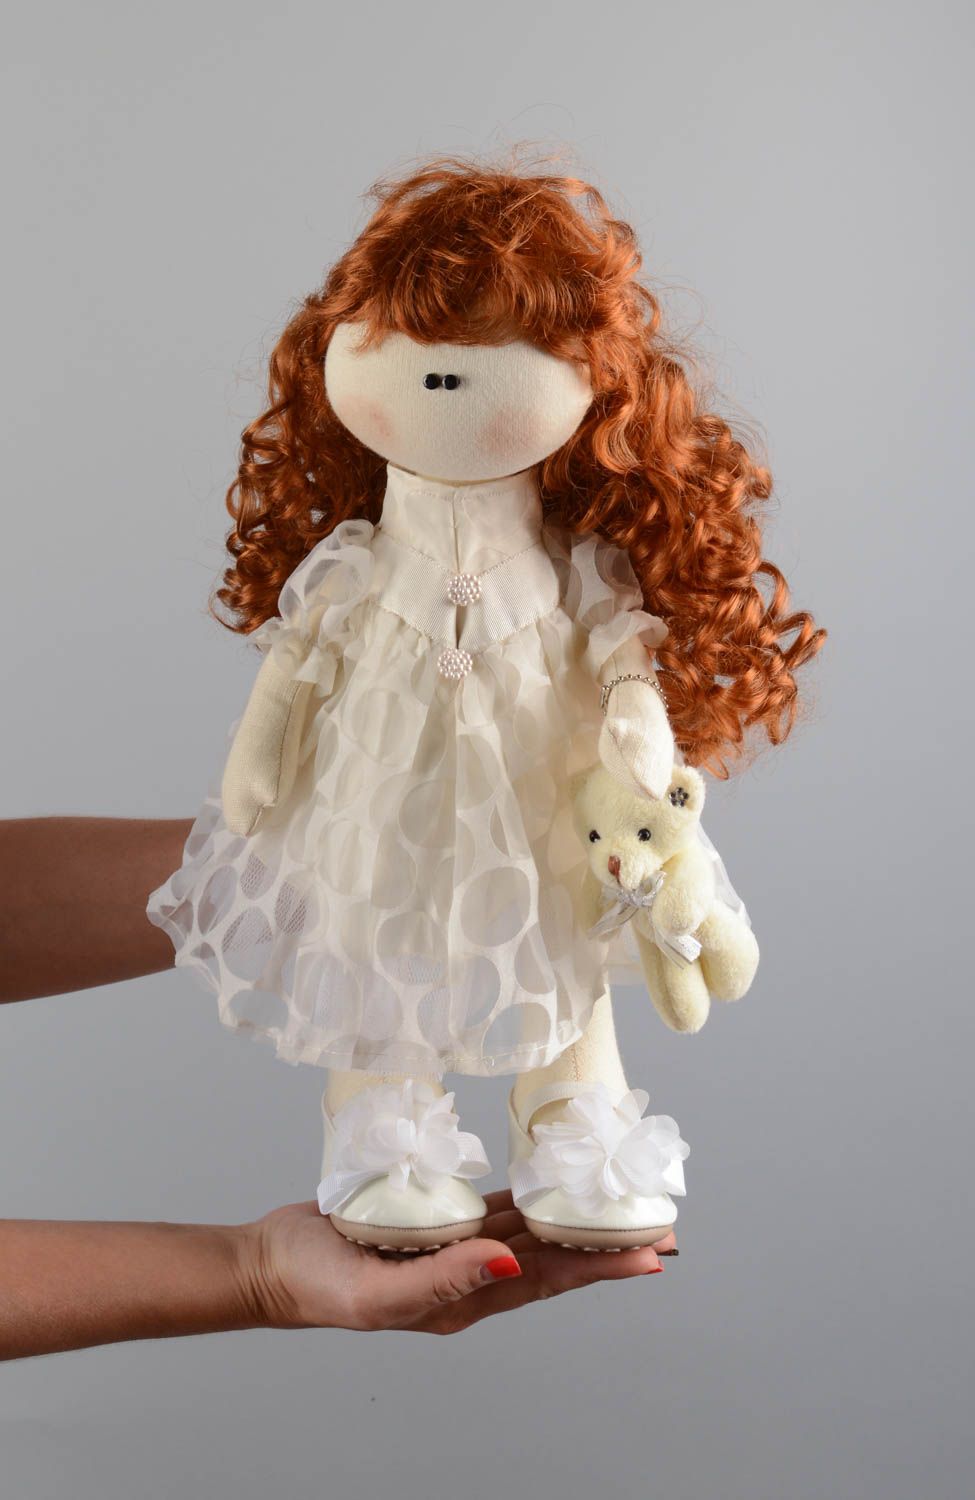 Handmade designer soft doll sewn of linen cute girl with curly hair in dress photo 5